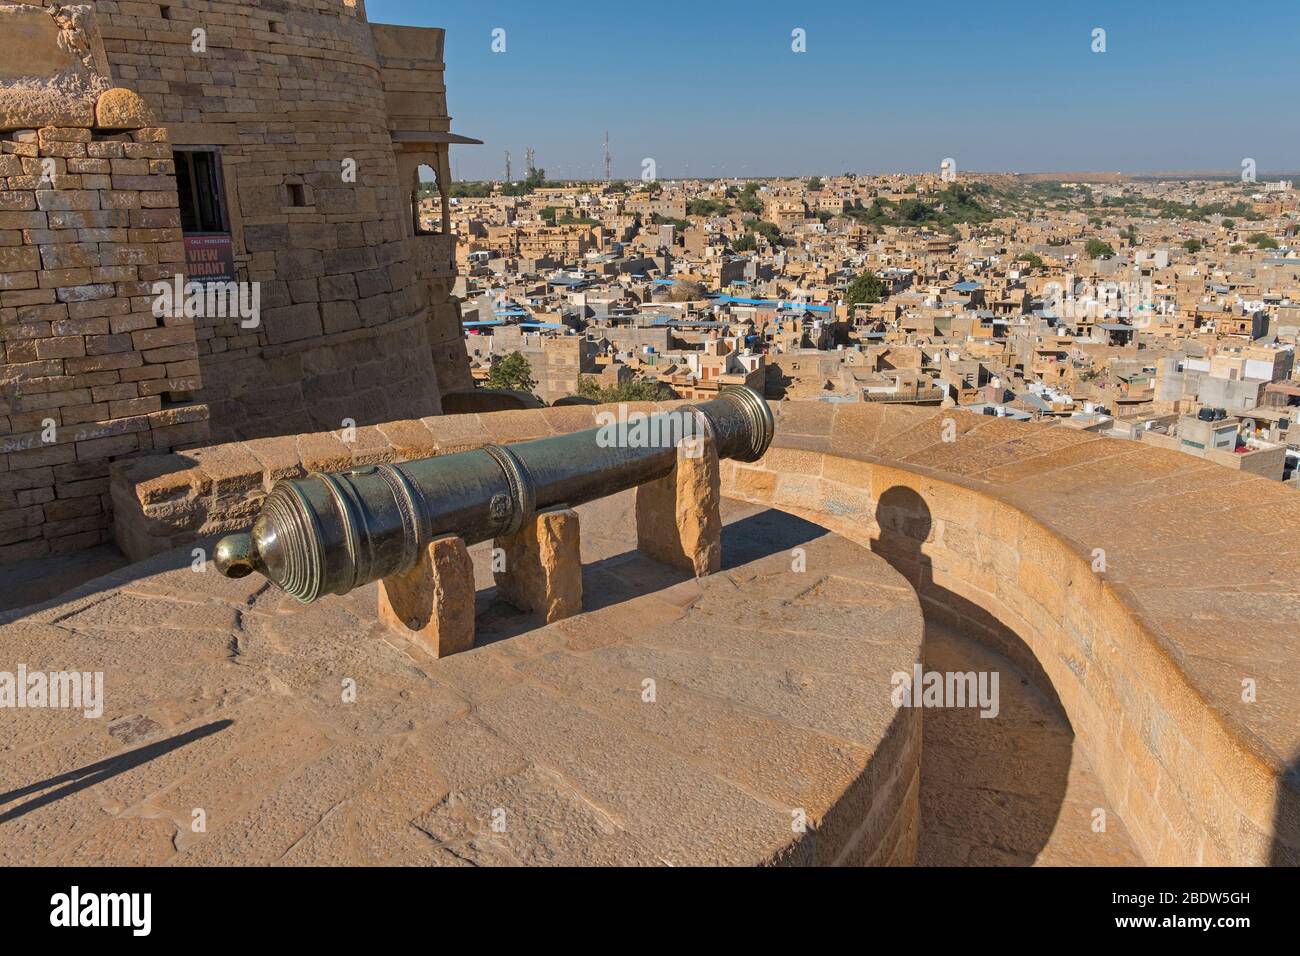 Cannon Point city view Jaisalmer Fort Rajasthan India Stock Photo